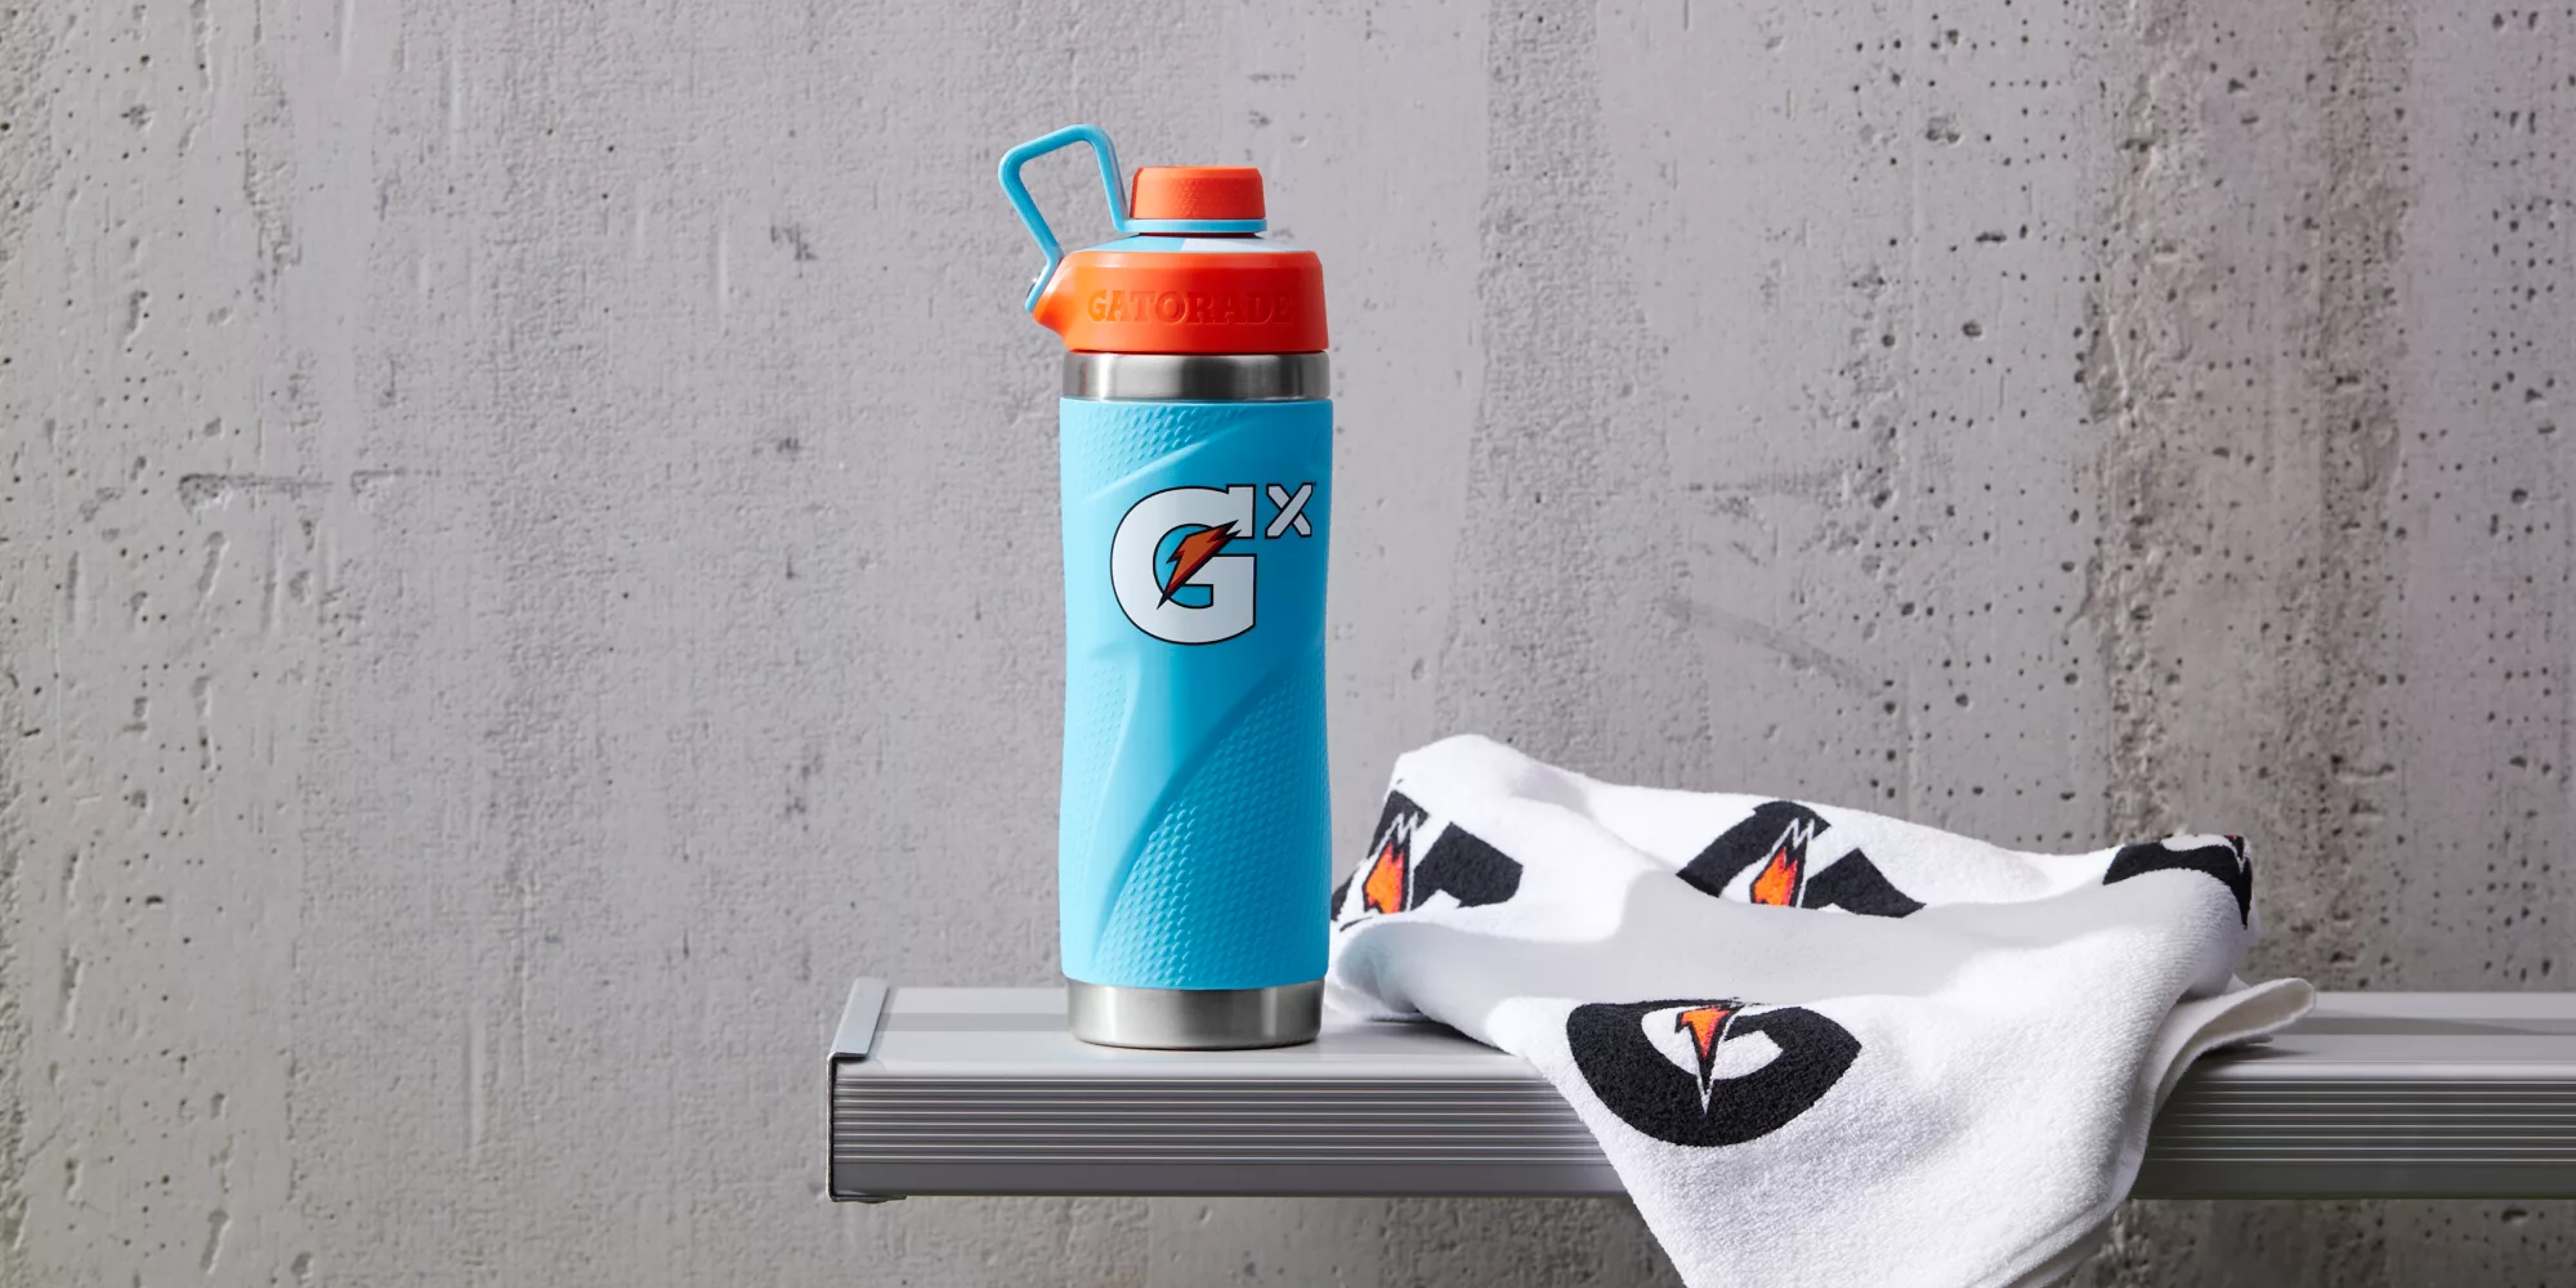 Gx stainless steel bottle with Gx towel